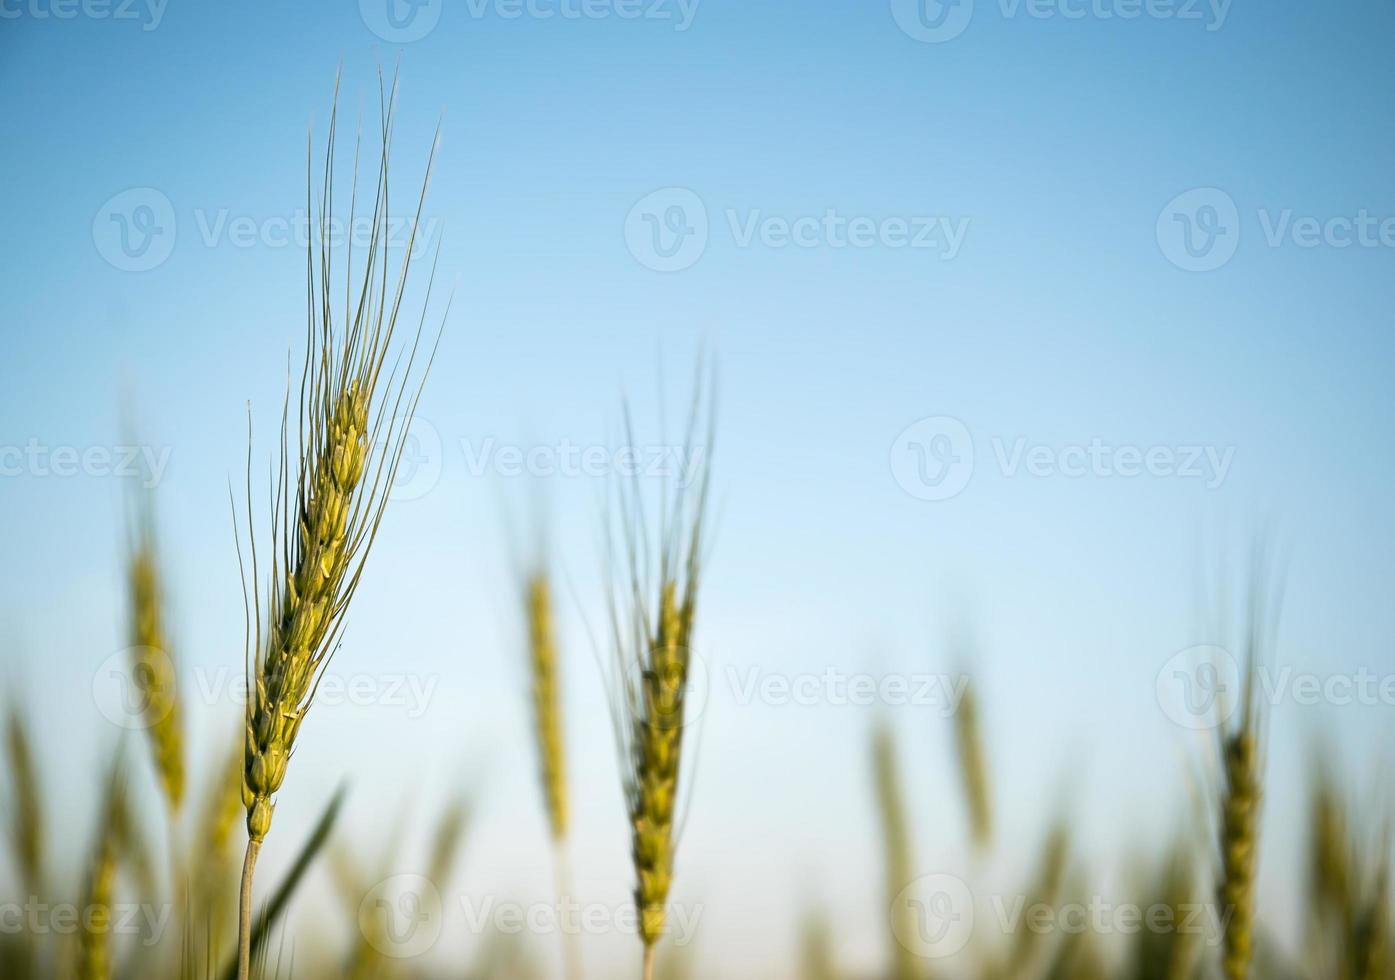 Image of  barley corns growing in a field photo